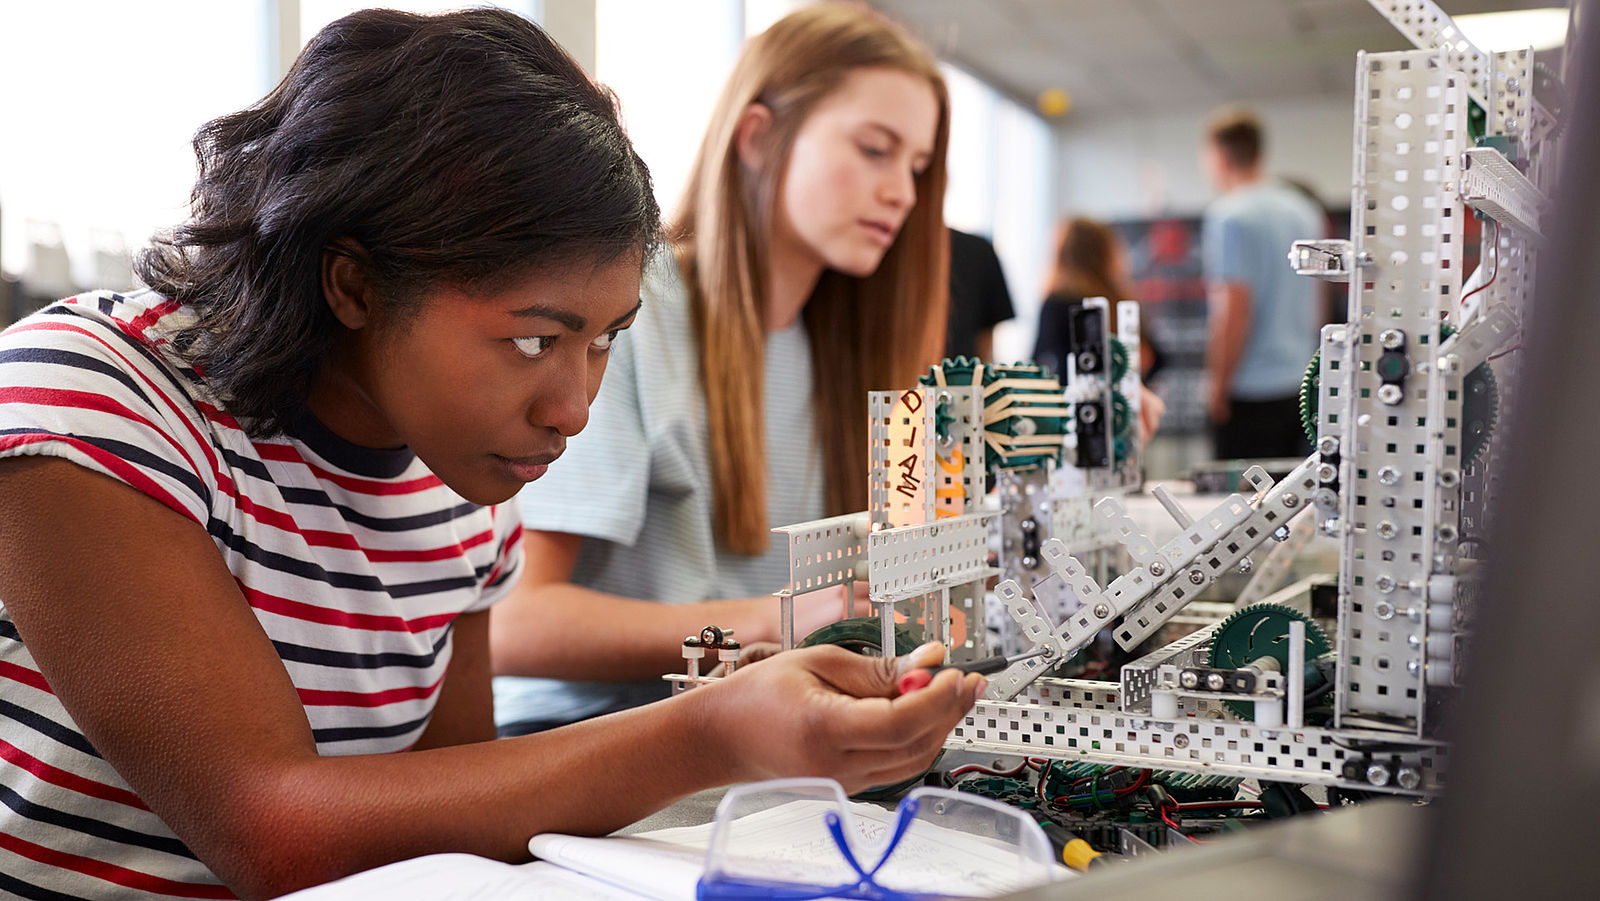 Engineering Education opportunity: Pass on your knowledge to young people 